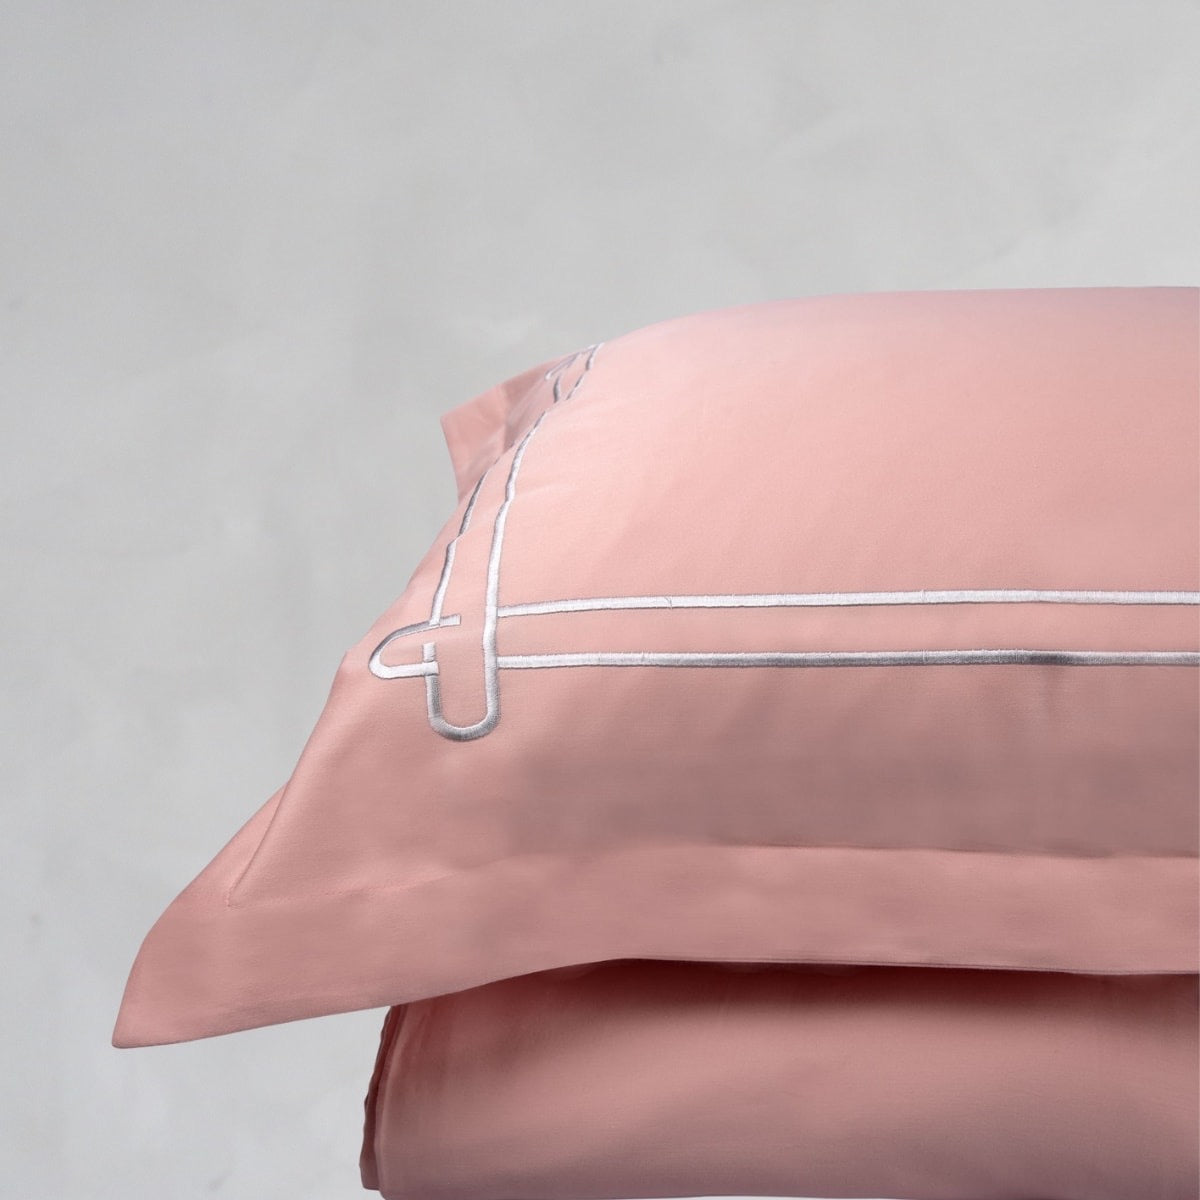 Classic Coral Peach Cotton Sateen Bed Sheet by Veda Homes